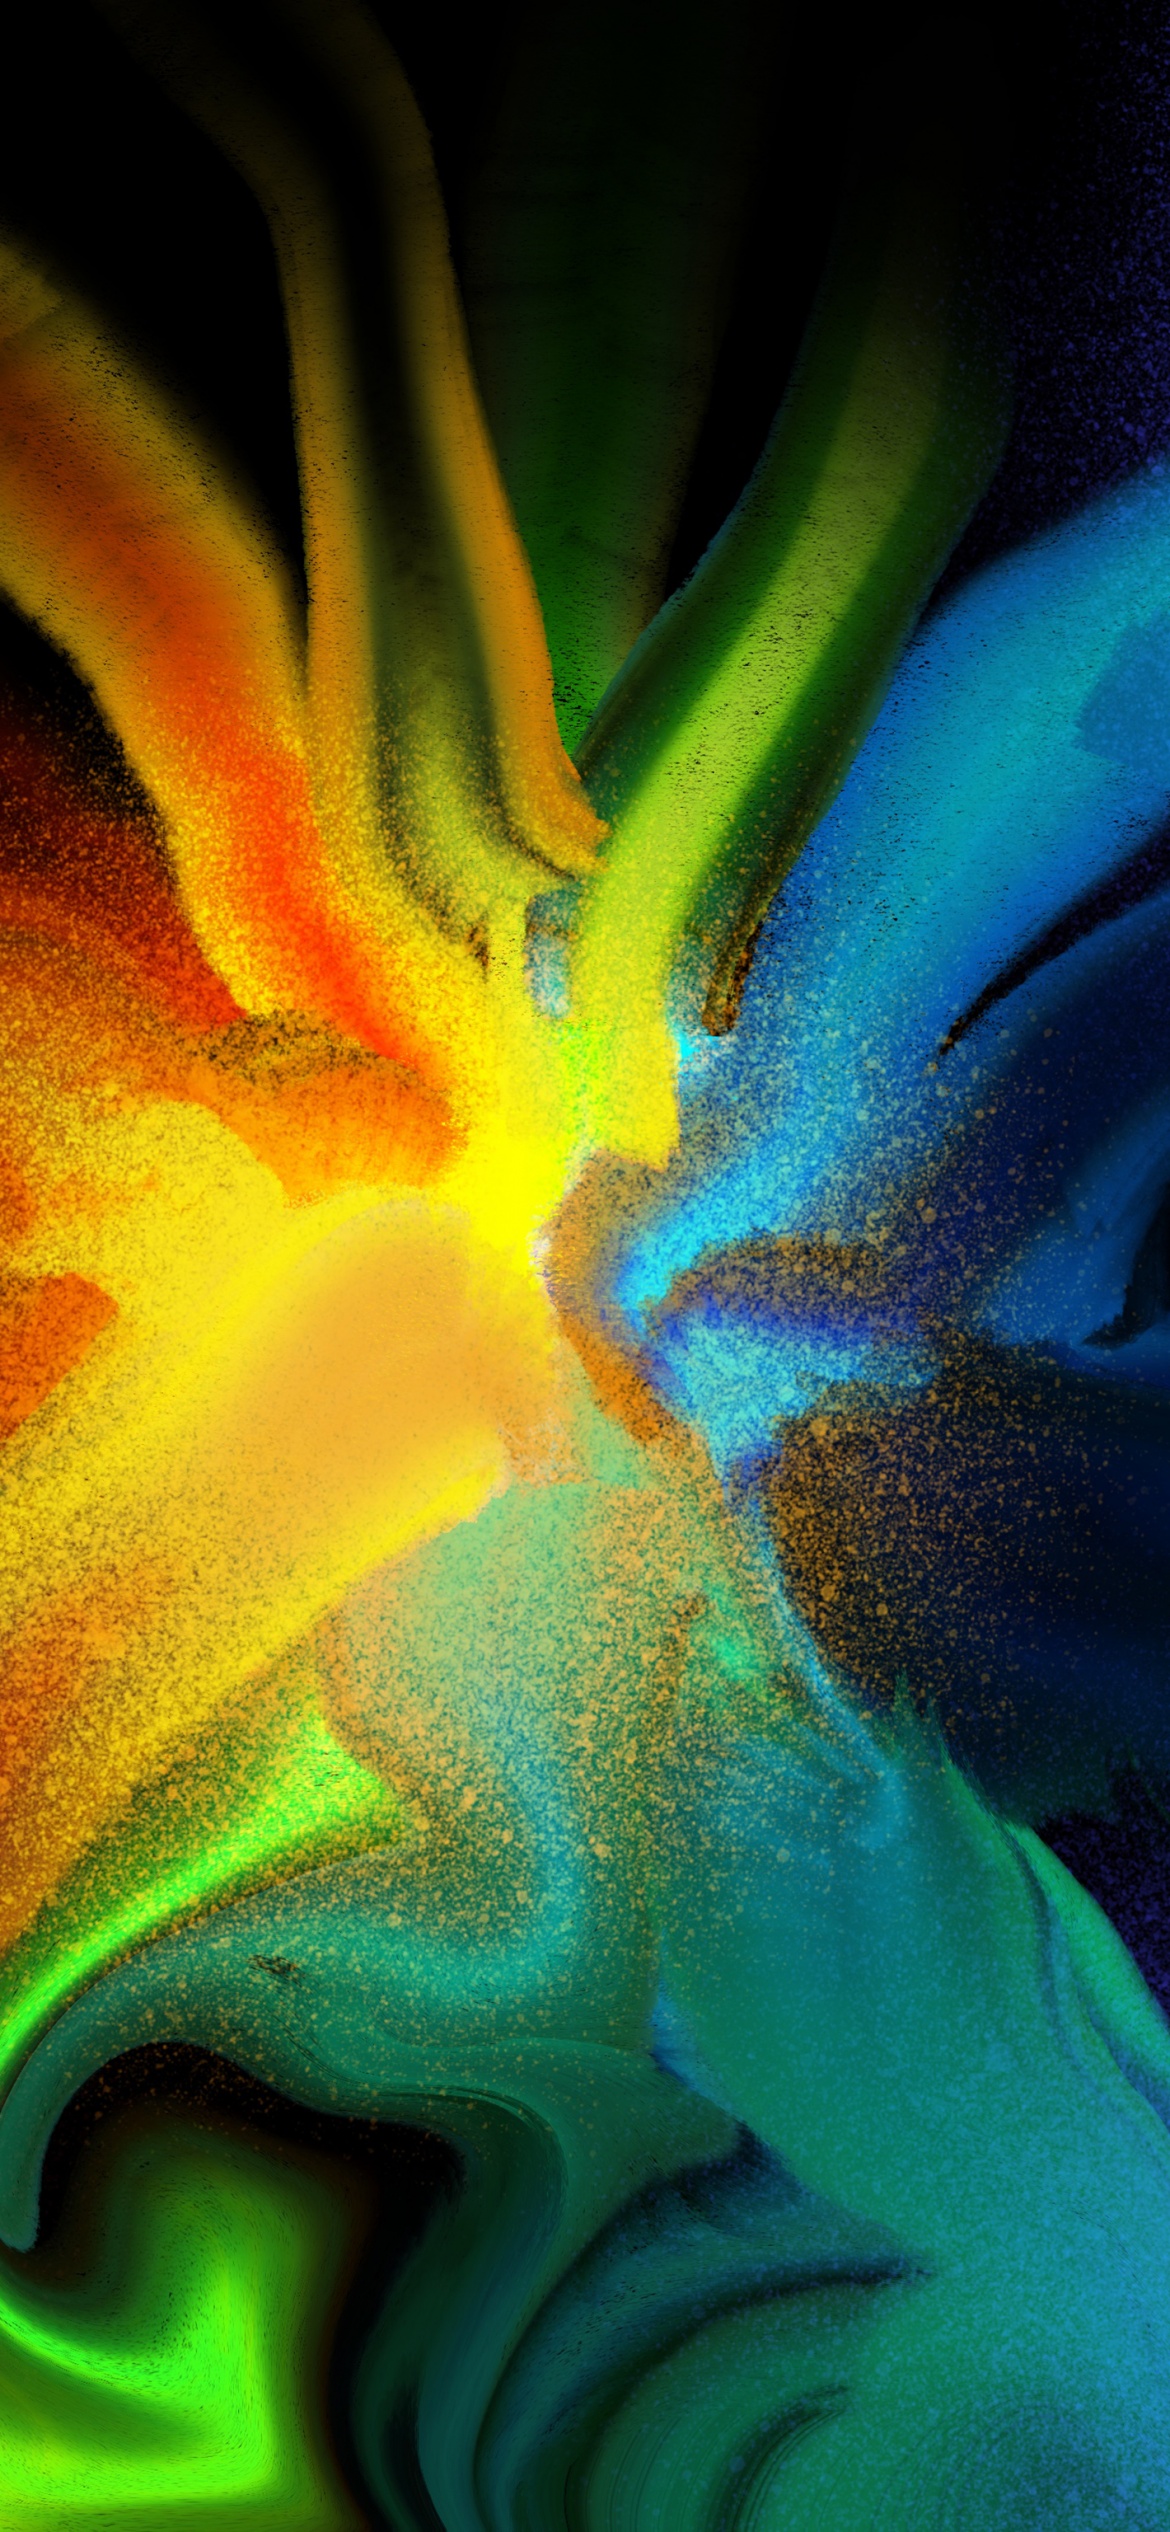 Colorful background Wallpaper 4K, Rainbow, 5K, Abstract, #7930